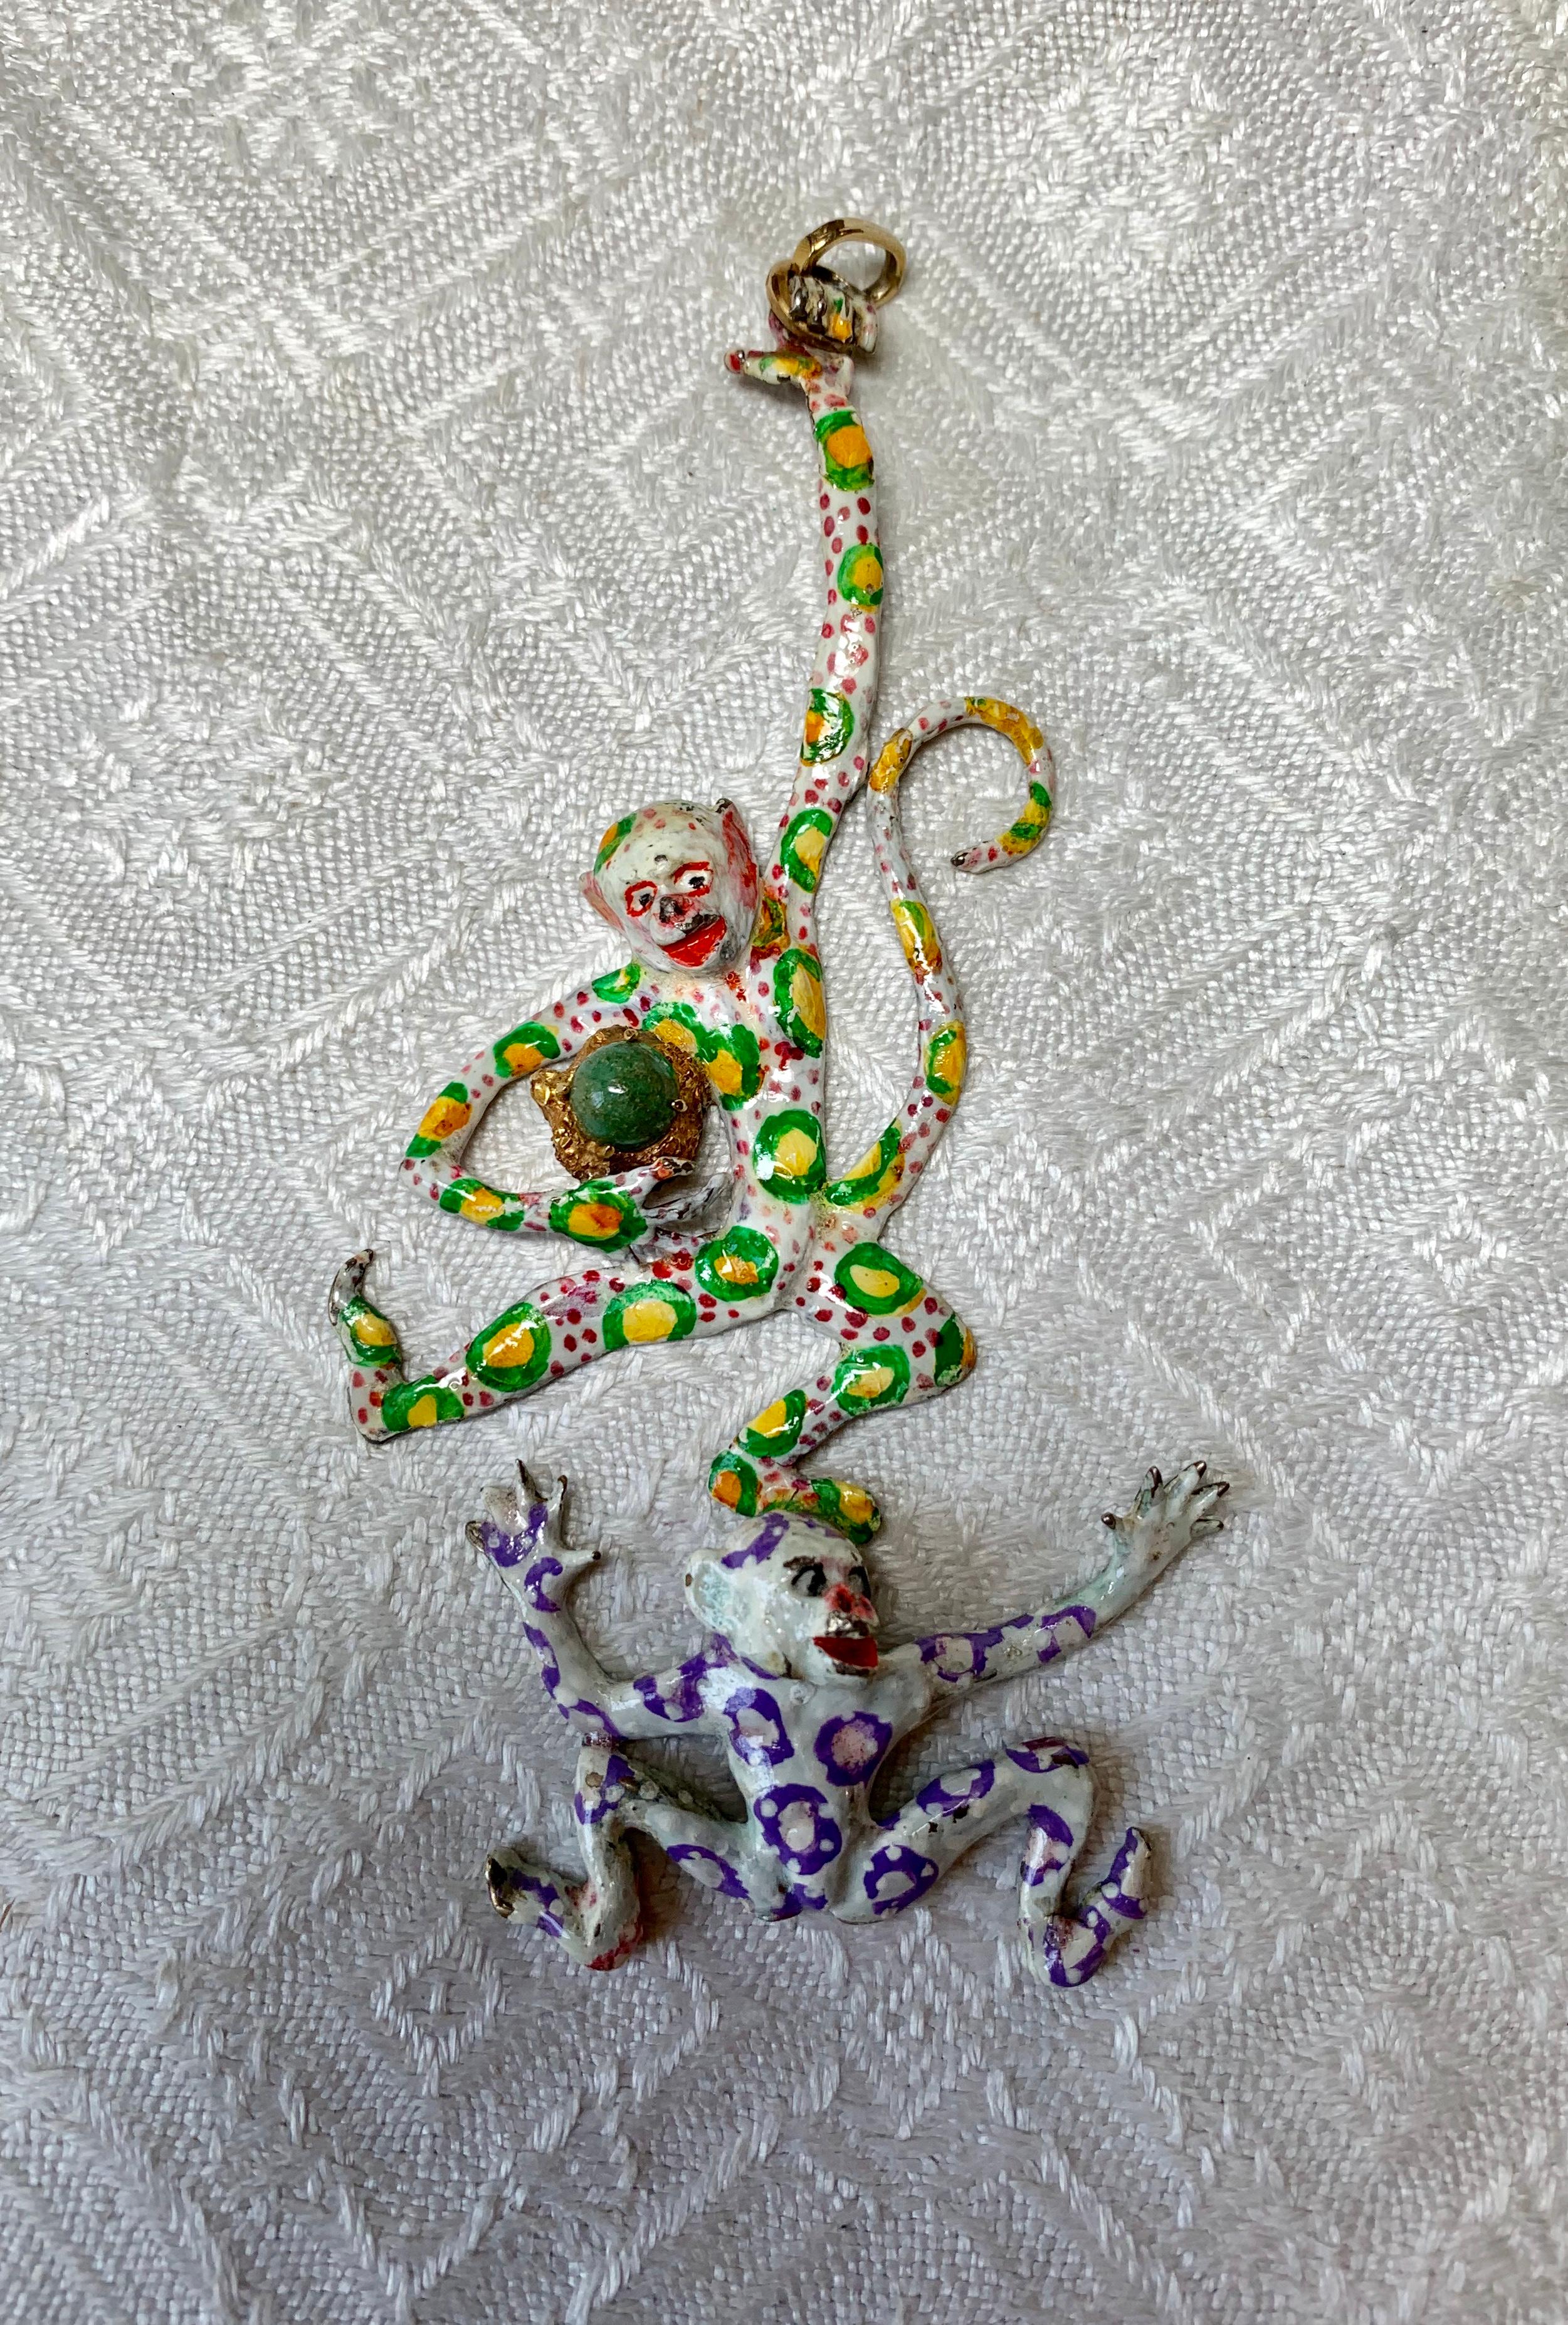 A spectacular piece of original jewelry art sculpture by famed Surrealist artist Eric de Kolb.  The pendant with two swinging monkeys is absolutely fantastic.  The monkeys are adorned with circle and dot motifs hand painted in polychrome enamel over